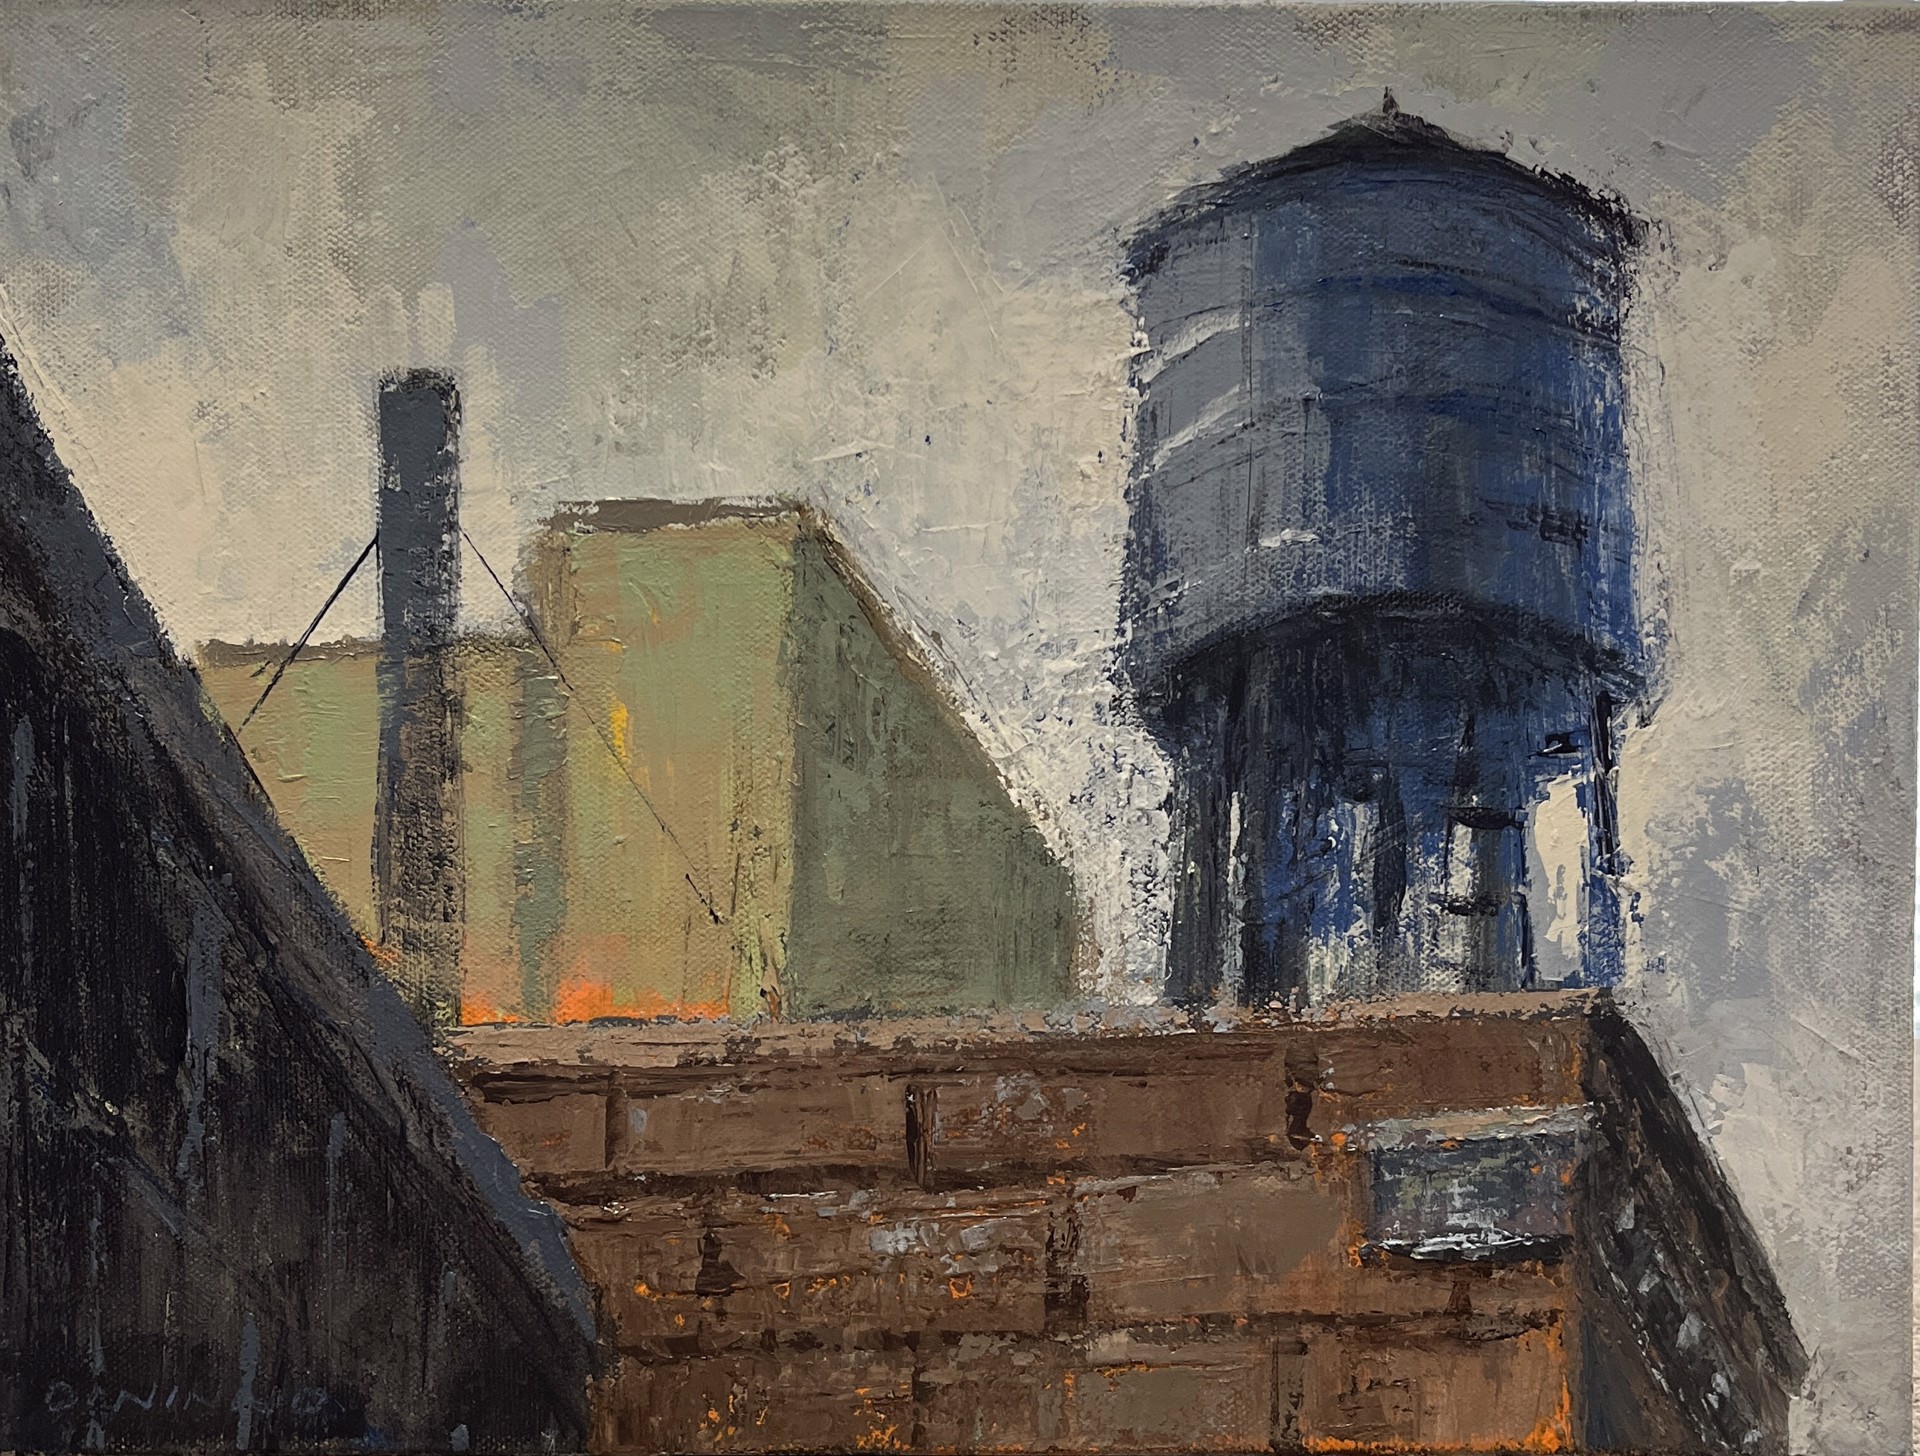 8th Street Water Tower by Steve Dininno